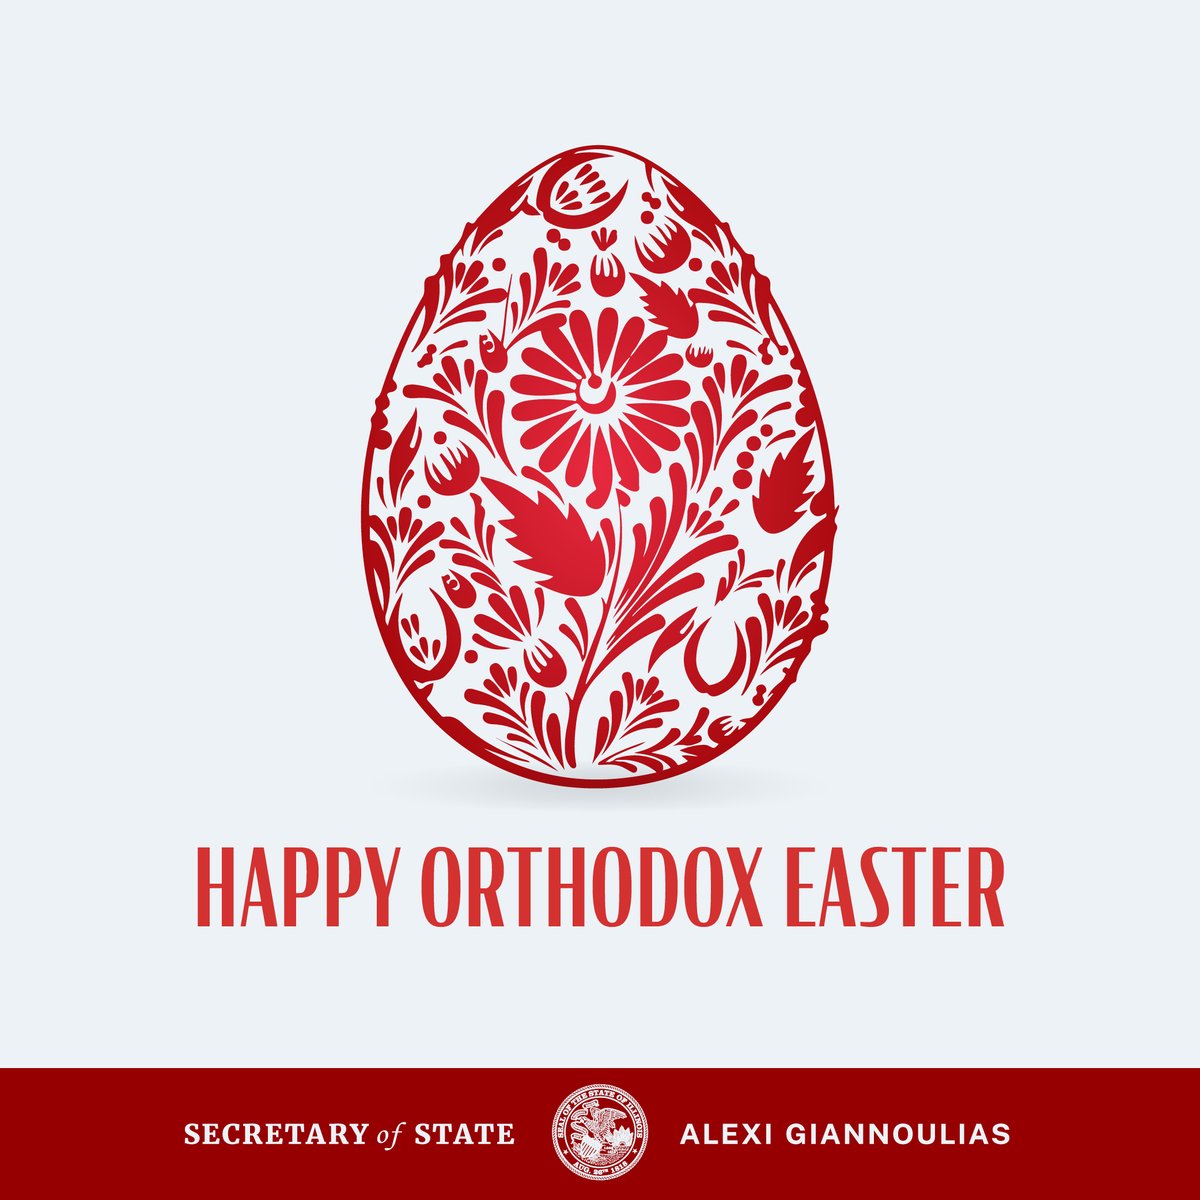 Happy #OrthodoxEaster to everyone celebrating! May this sacred day bring peace, joy, and renewed hope to you and your loved ones.